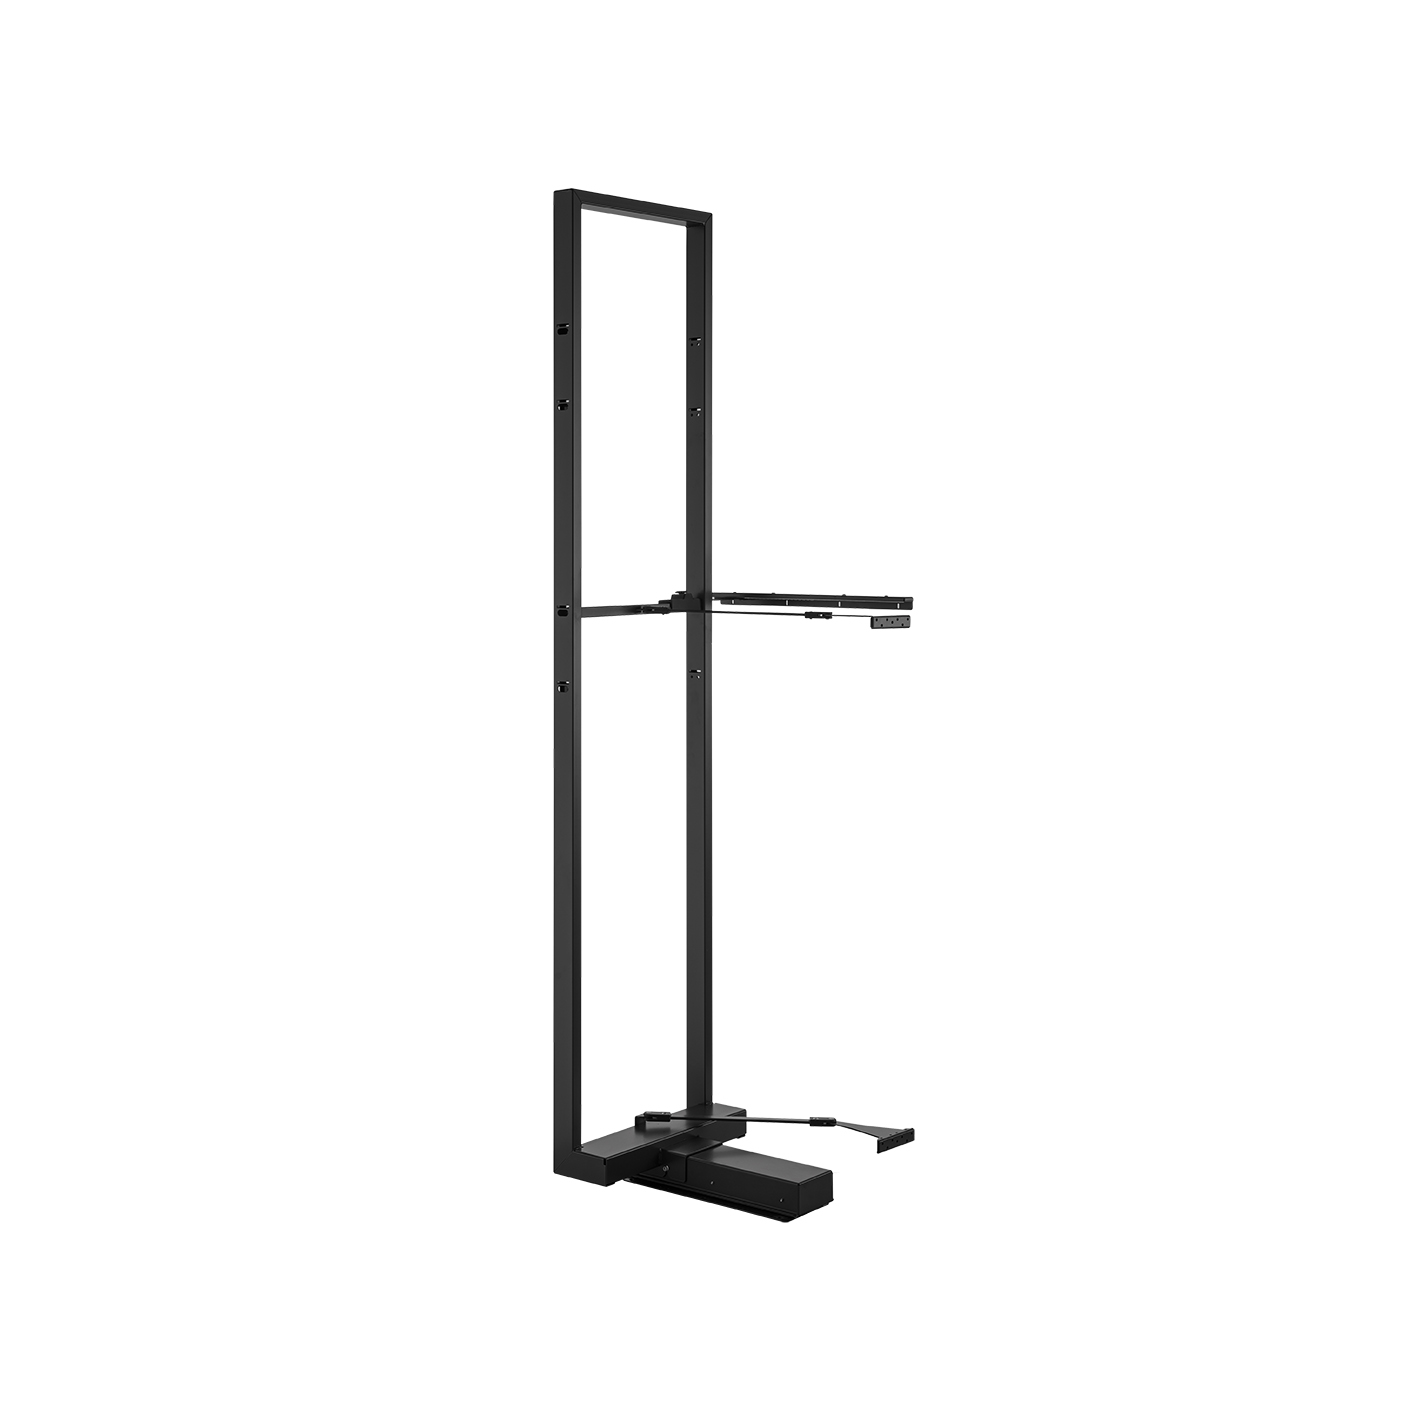 Vibo Maxi Pantry Pullout Frame 600mm (24 in) Anthracite Grey